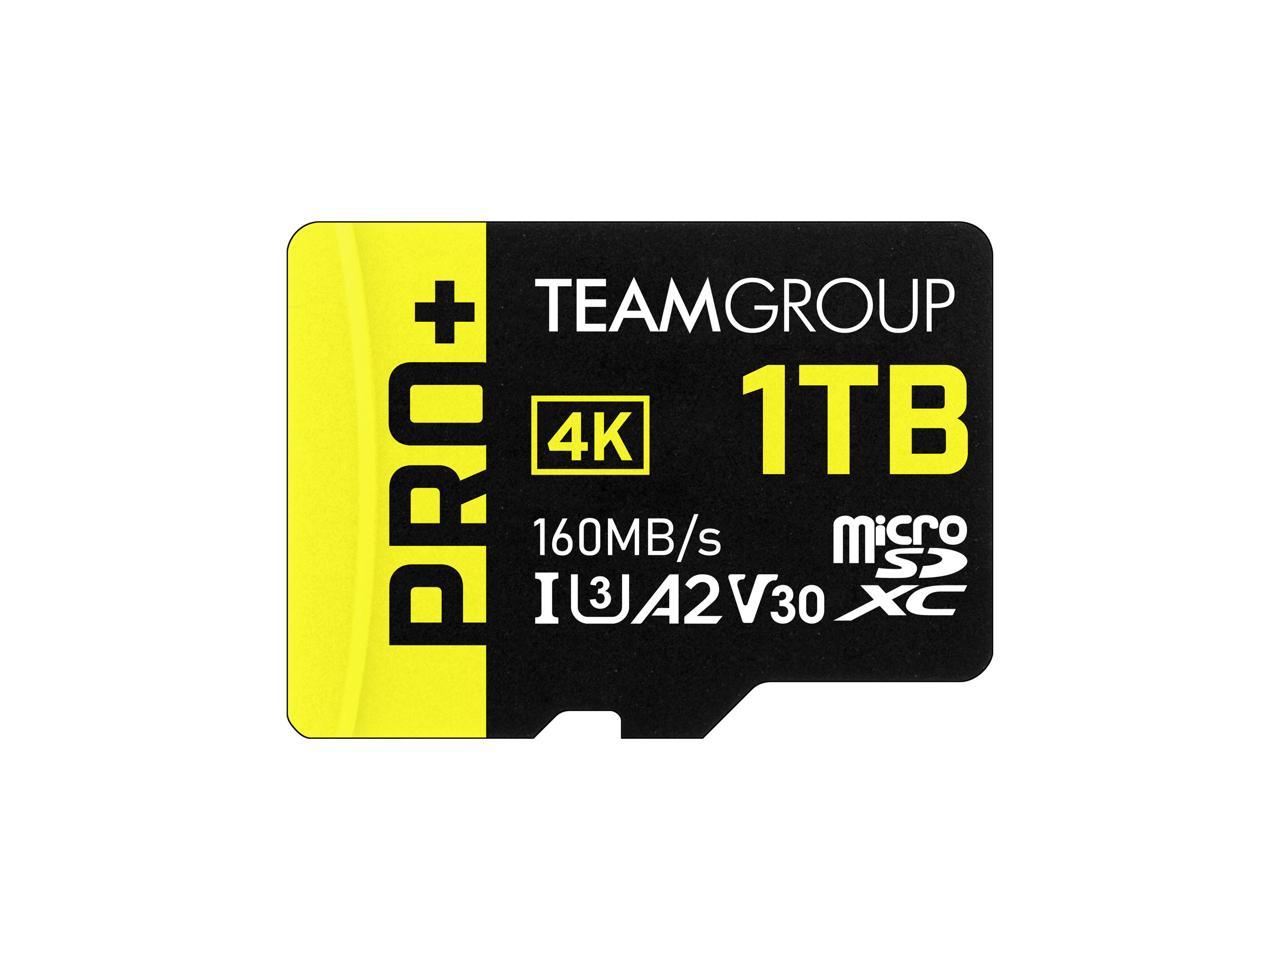 Team 1TB Pro+ microSDHC UHS-I/U3 Class 10 Memory Card with Adapter, Speed Up to 160MB/s (TPPMSDX1TIA2V3003) - image 1 of 4